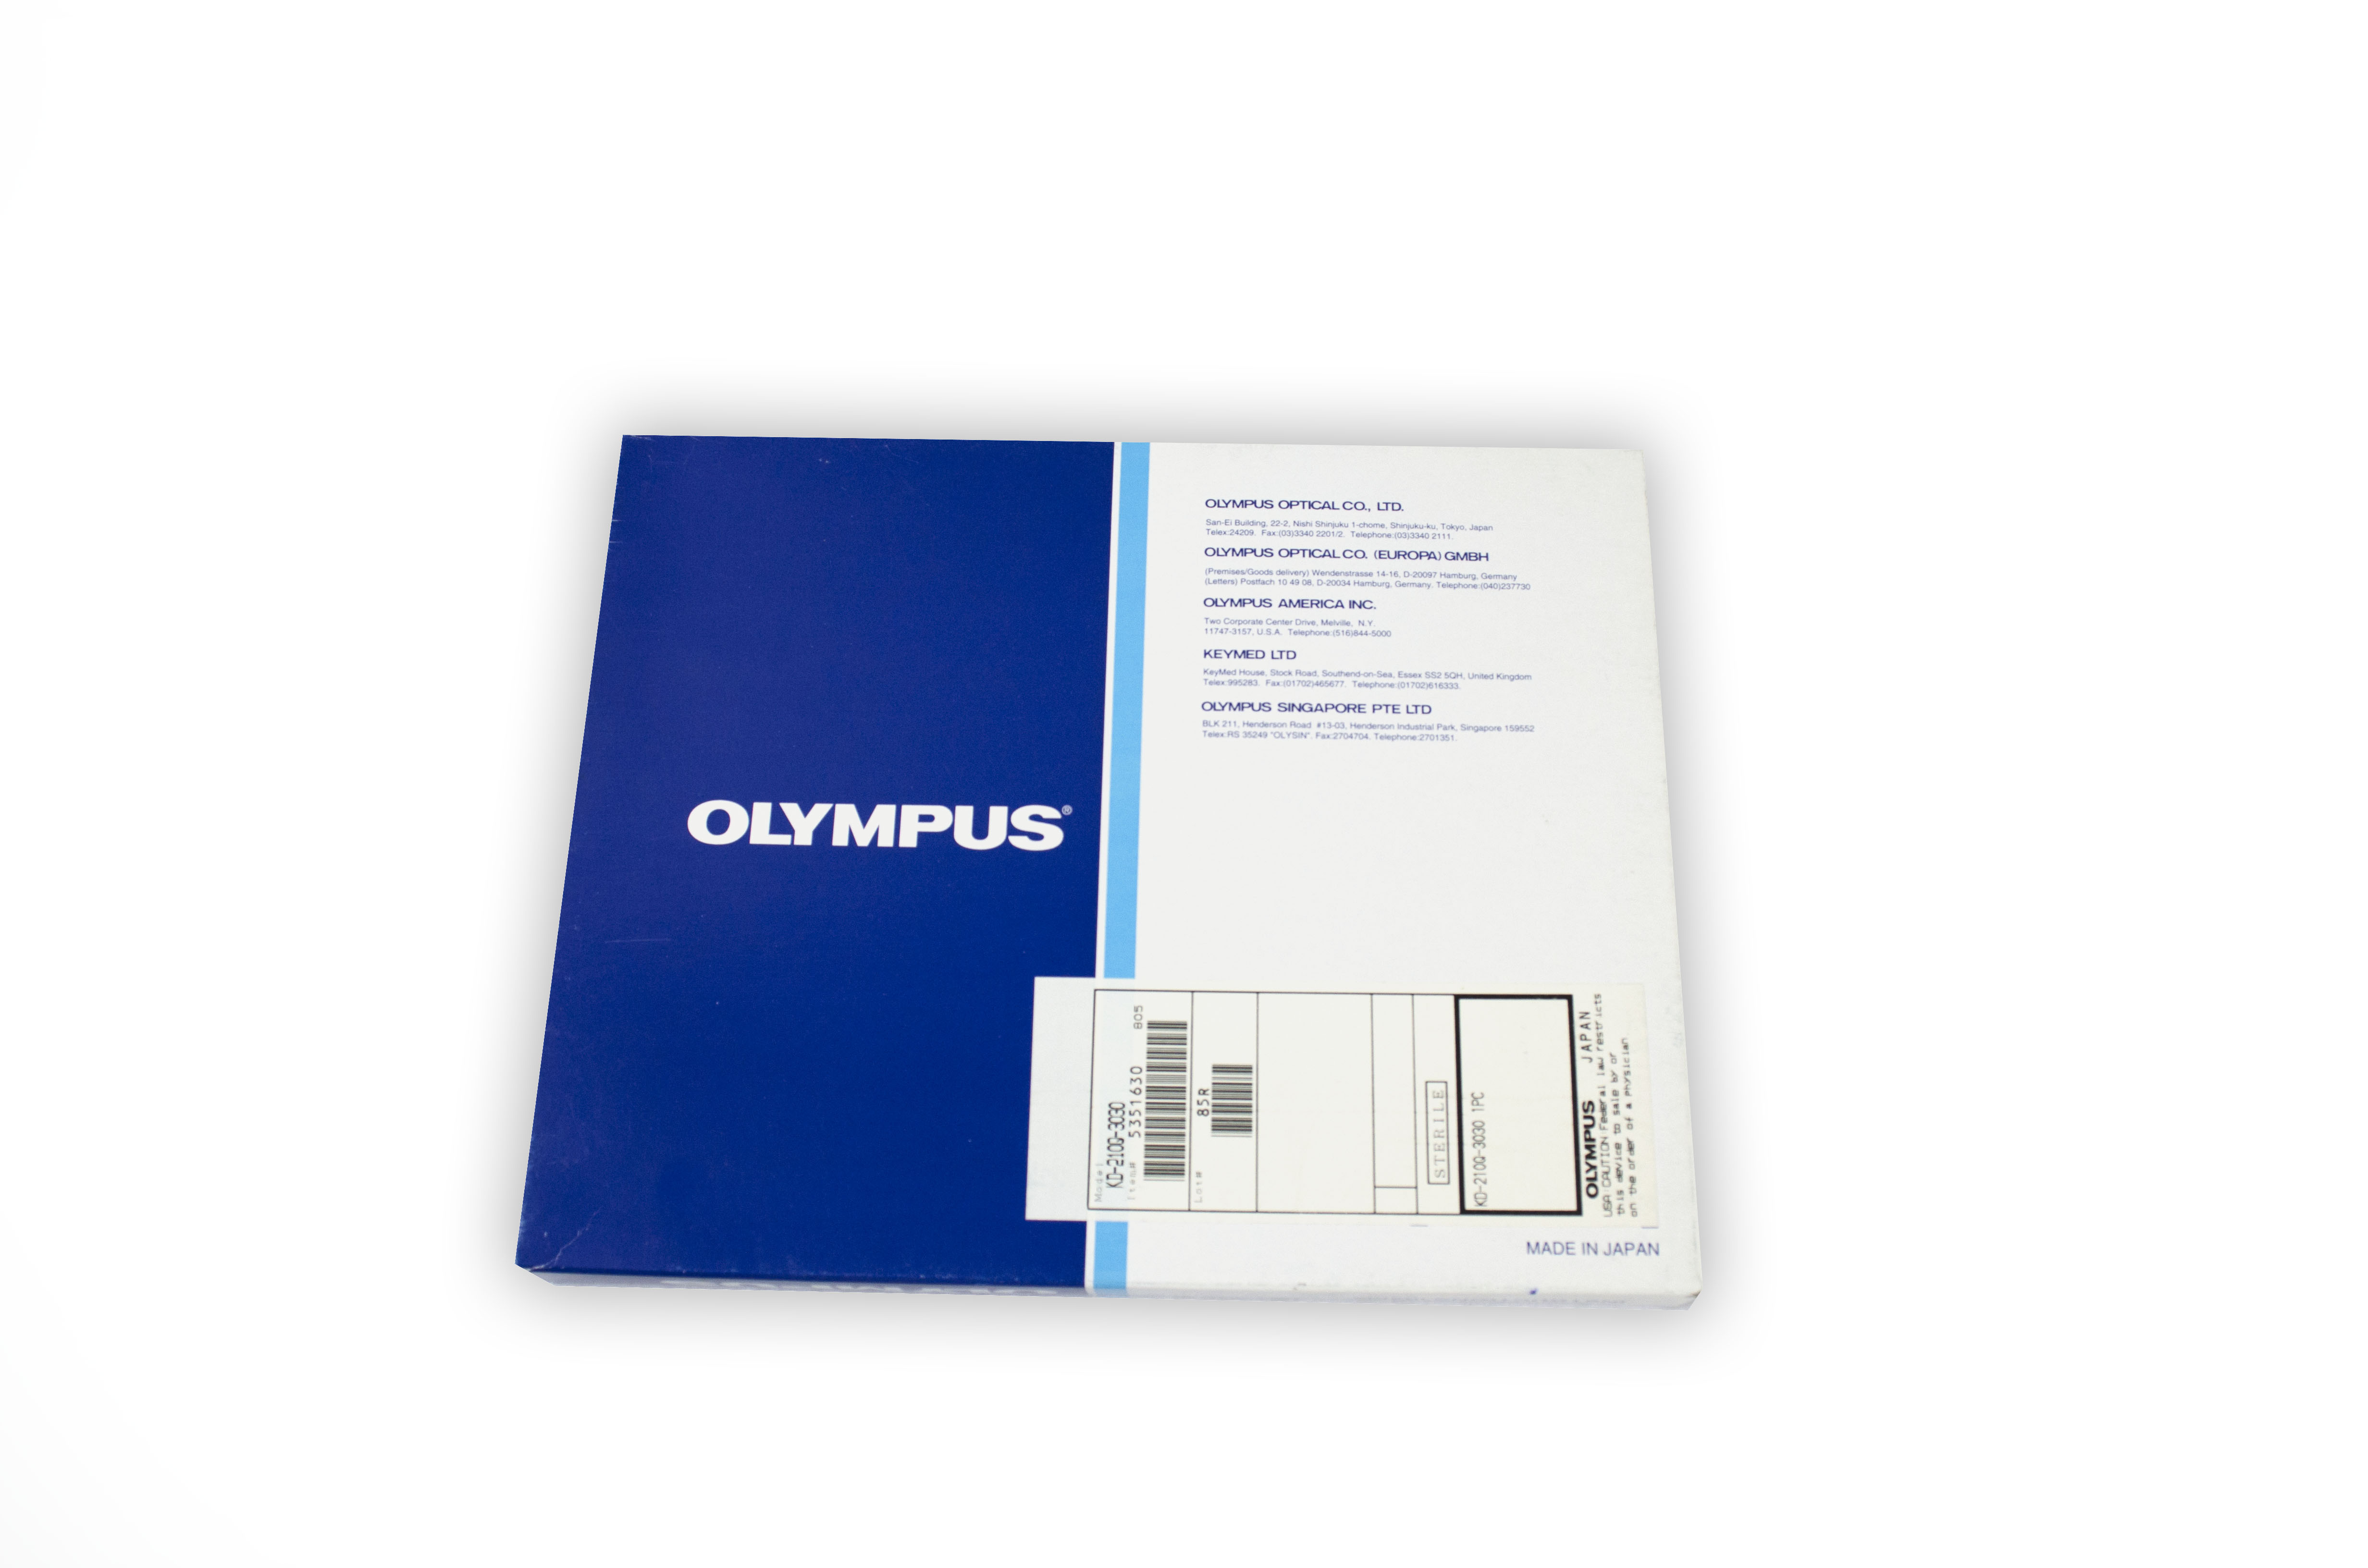 [Out-of-Date] Olympus Disposable Sphincterotome - KD-210Q-3030